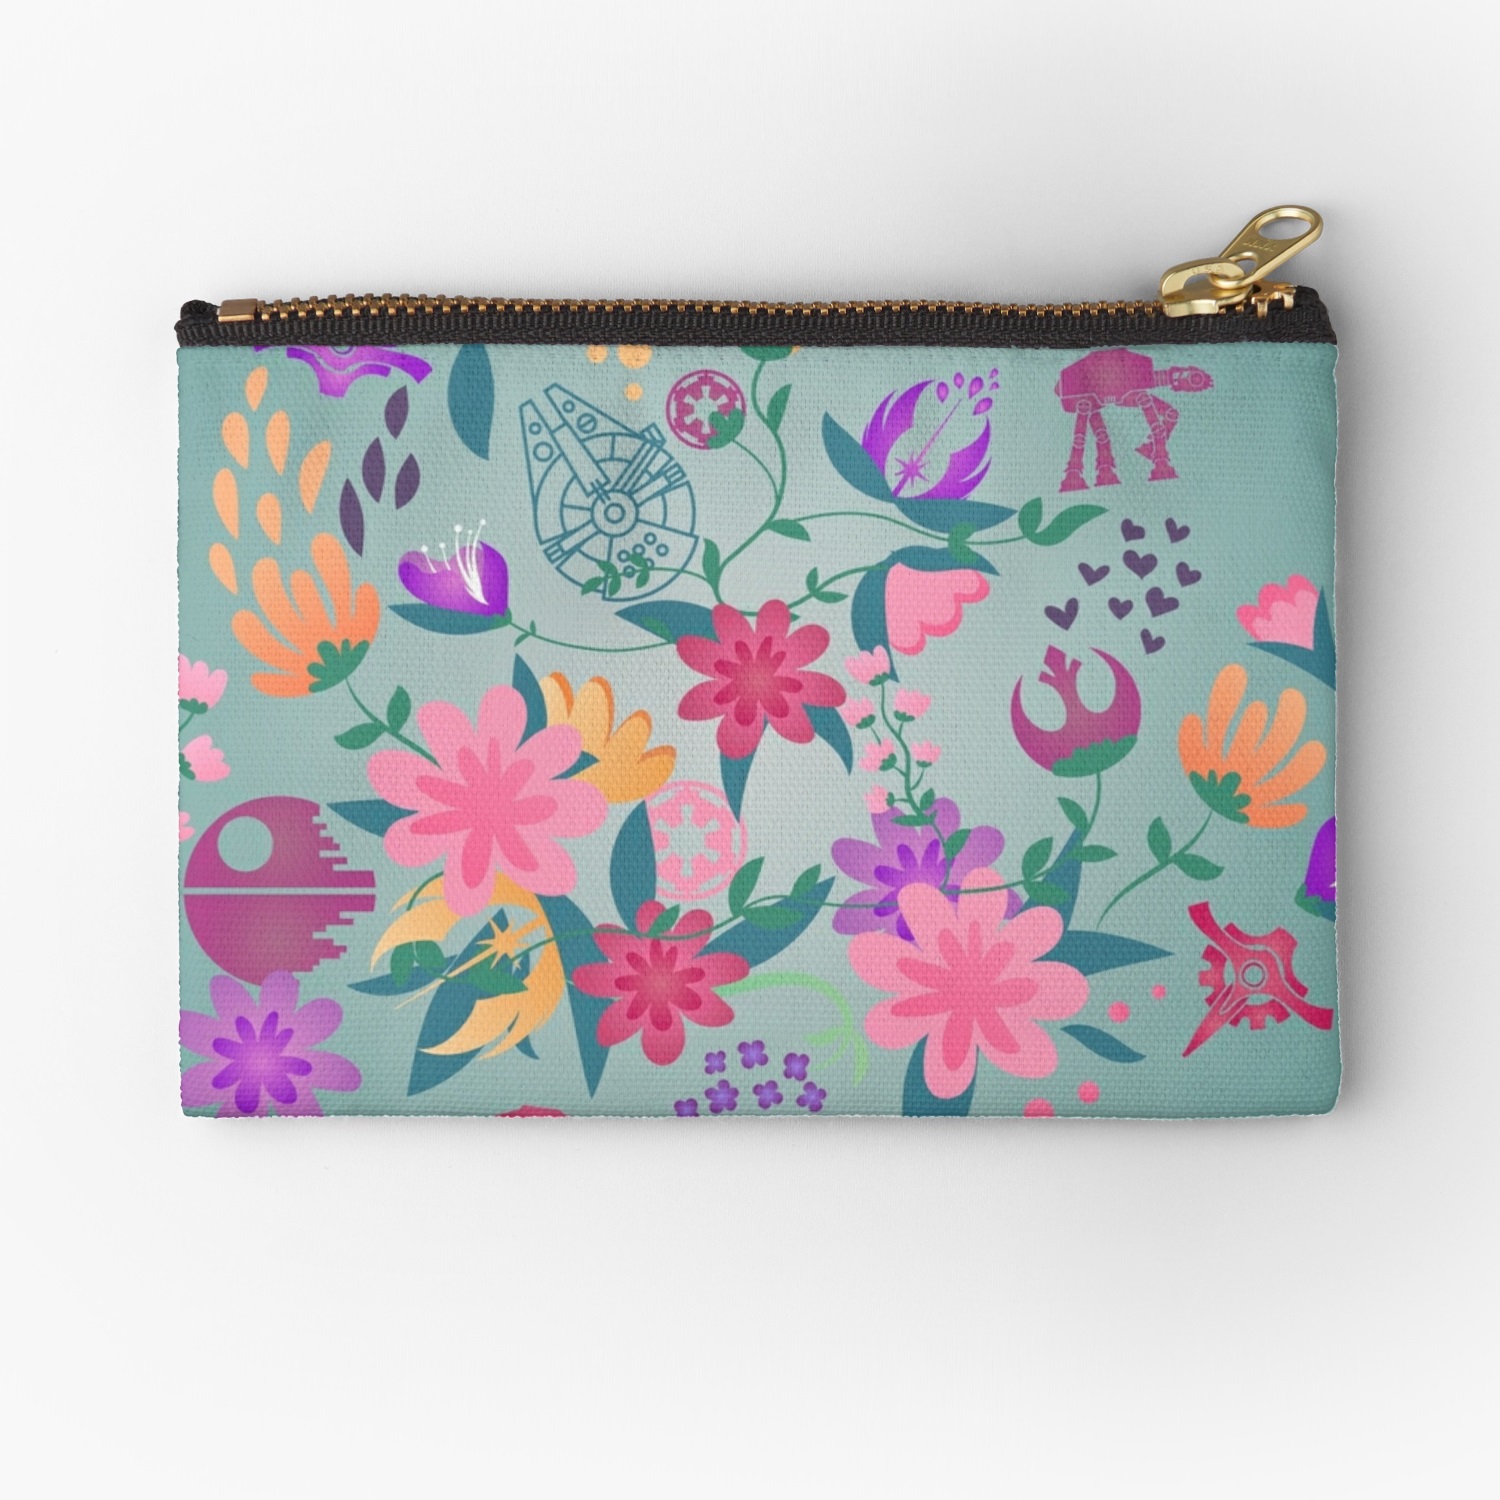 Star Wars Floral Print Zip Up Pouch by Fashions For Fans on RedBubble